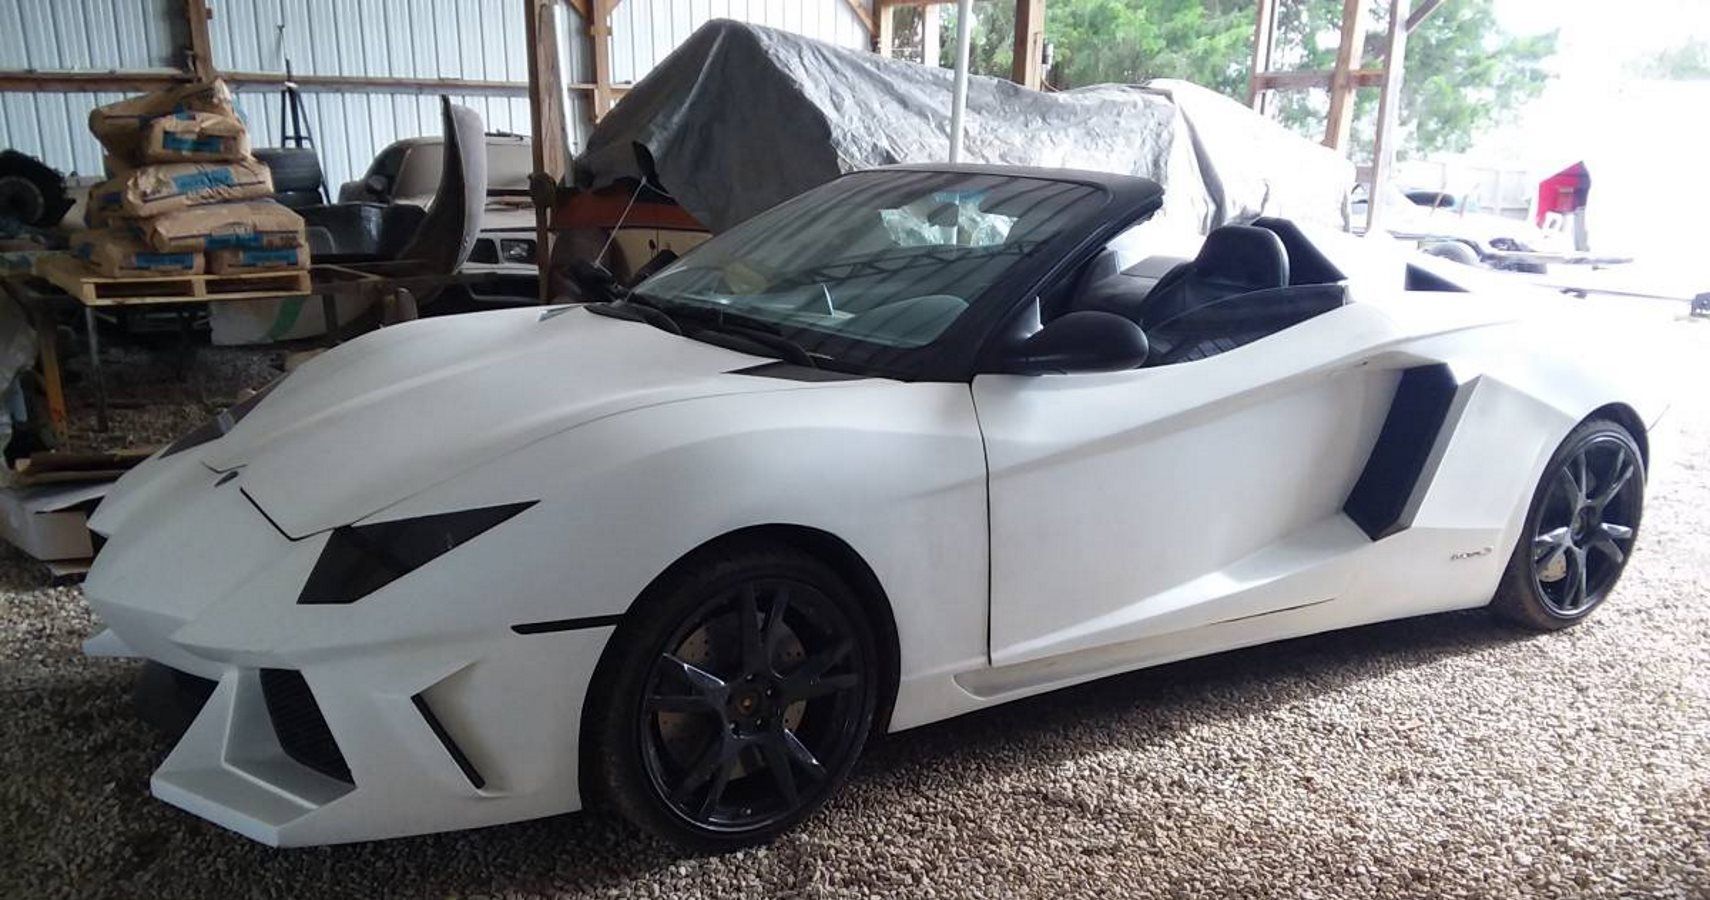 Someone Tricked Out Their Pontiac To Look Like A Lamborghini And It Looks Awful